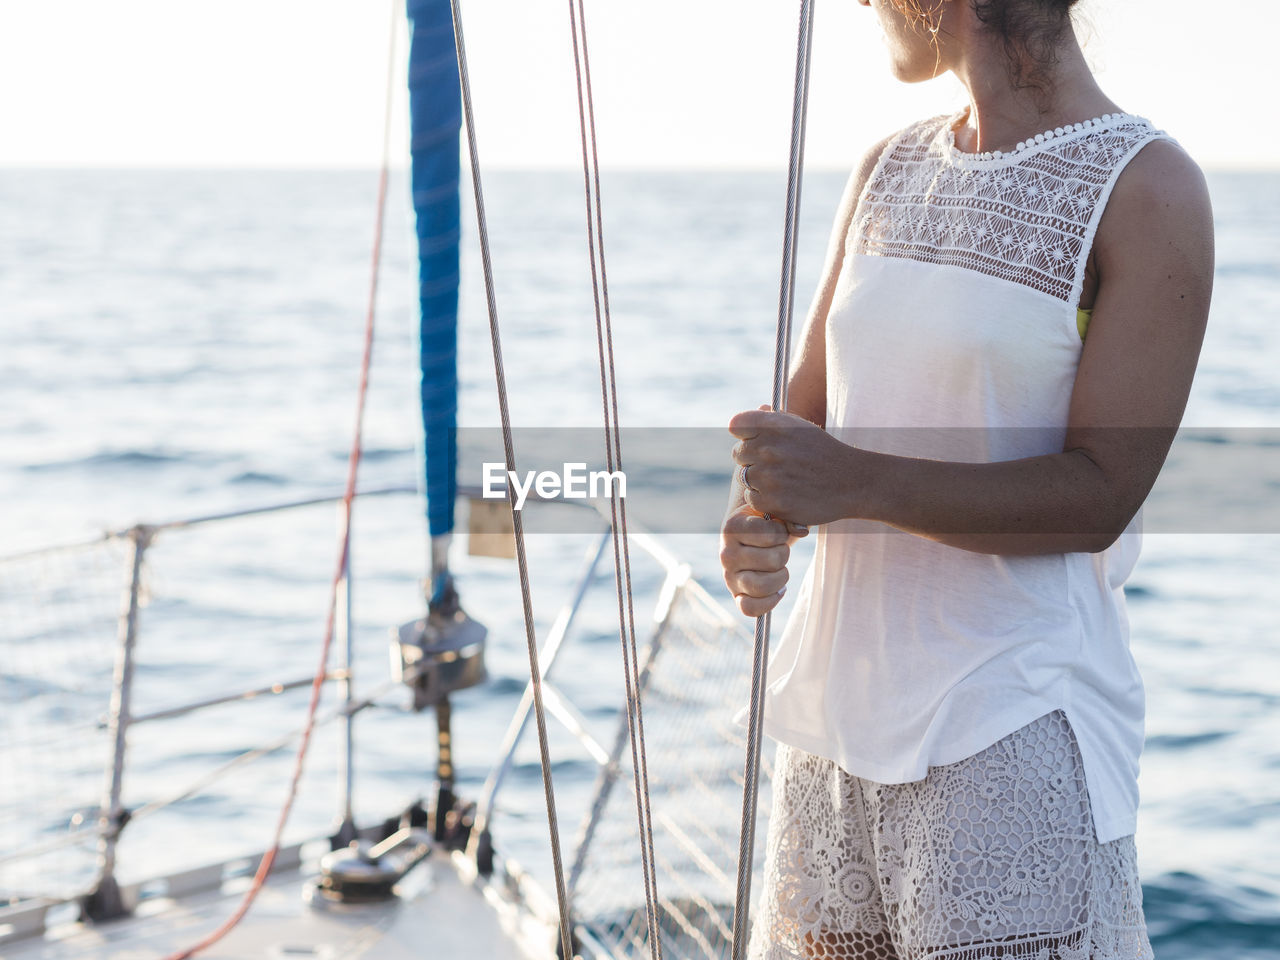 Midsection of mid adult woman holding rope while standing in sailboat on sea